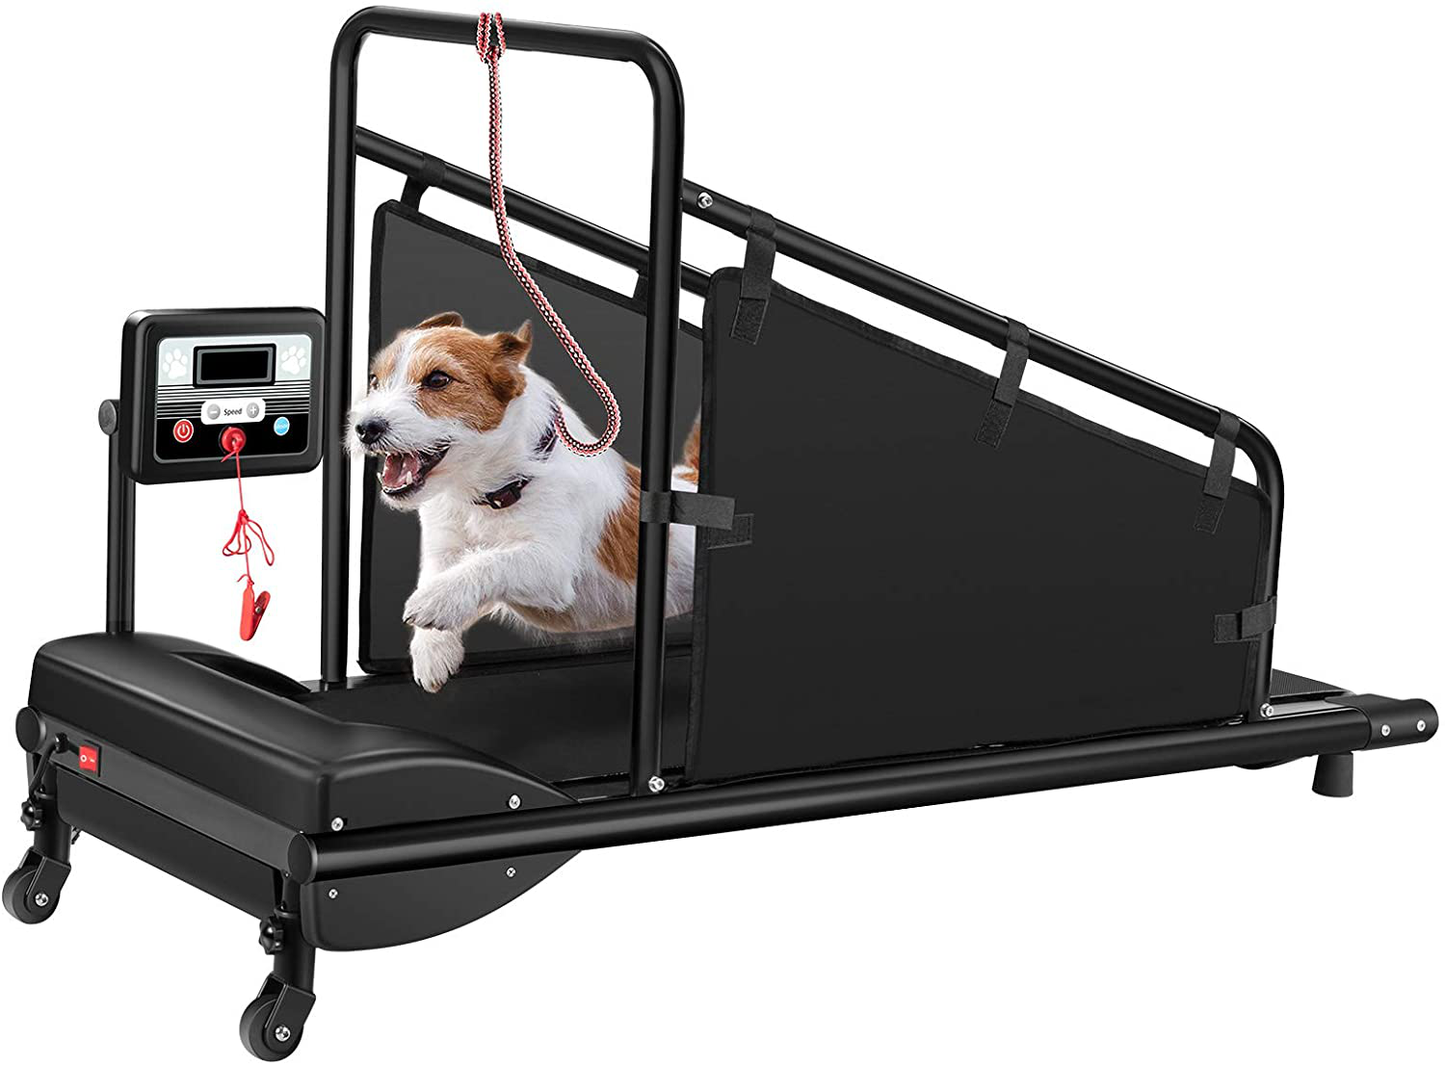 GYMAX Dog Treadmill, Small/Medium Dog Running Machine with LCD Display & Remote Control, Adjustable Speed Pet Treadmill for Pet up to 200LBS Animals & Pet Supplies > Pet Supplies > Dog Supplies > Dog Treadmills GYMAX   